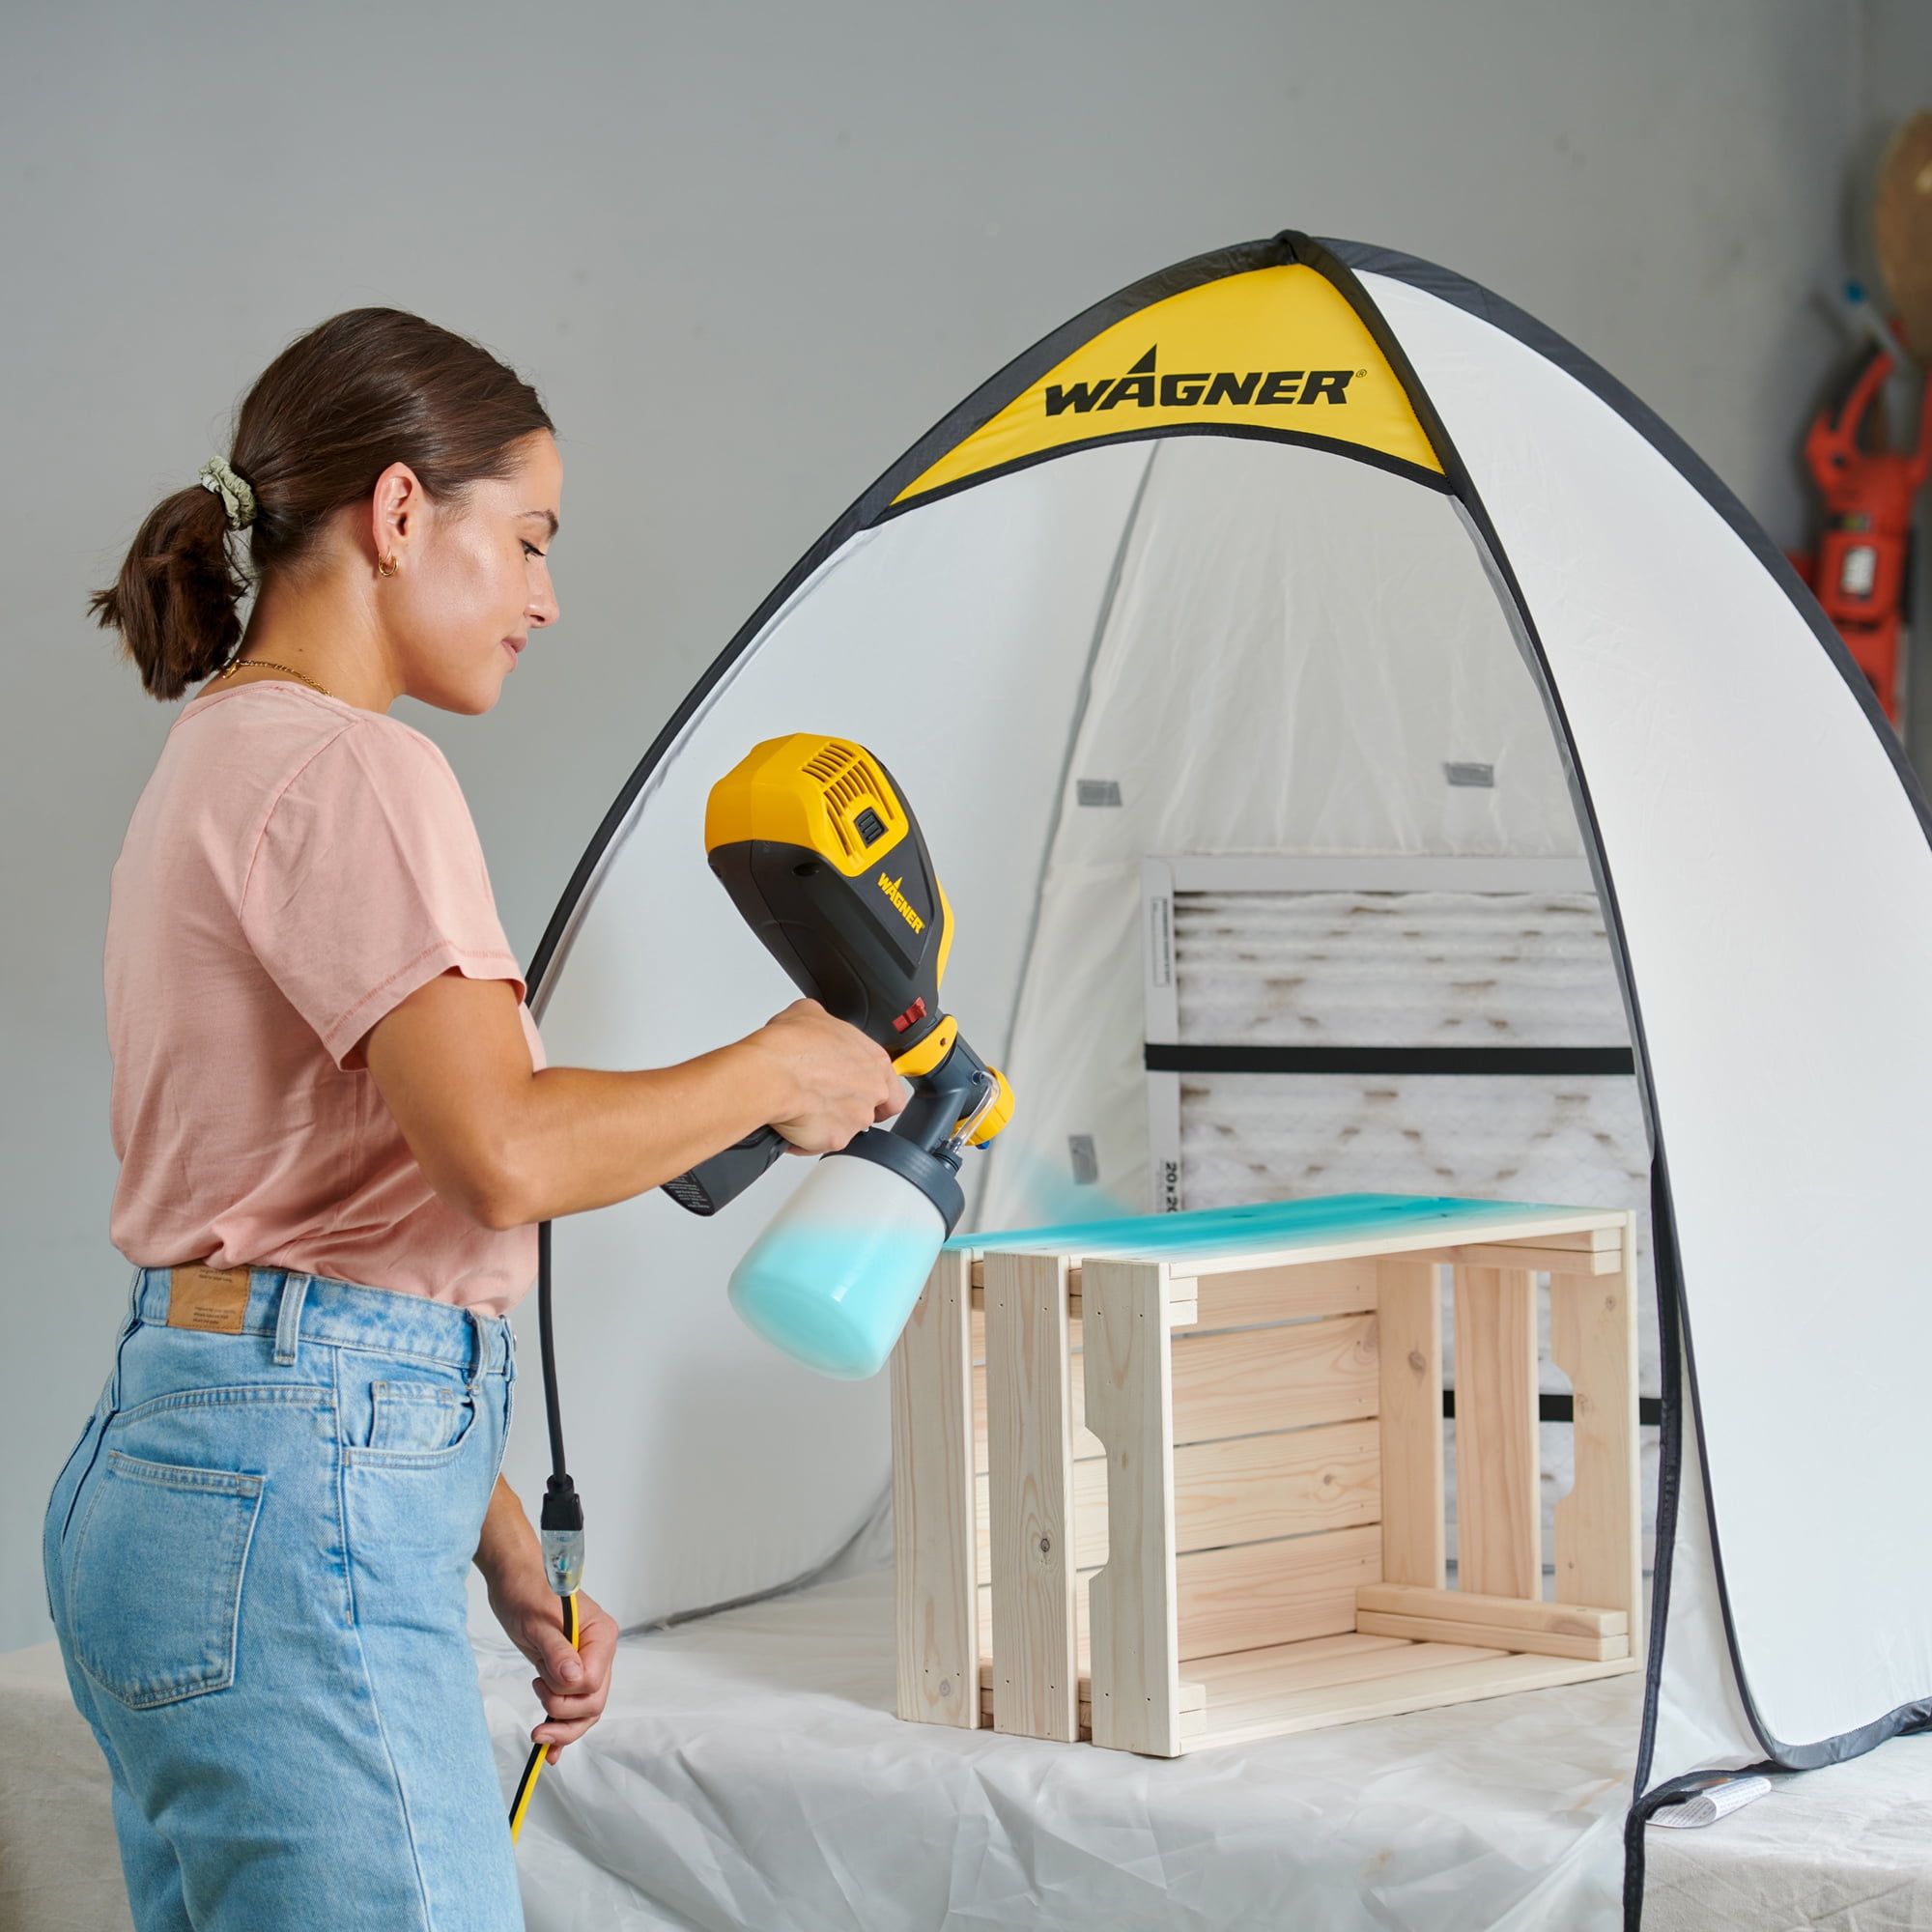 Wagner Large Spray Shelter with Floor & Screen - Portable Paint Booth for  DIY Spray Painting